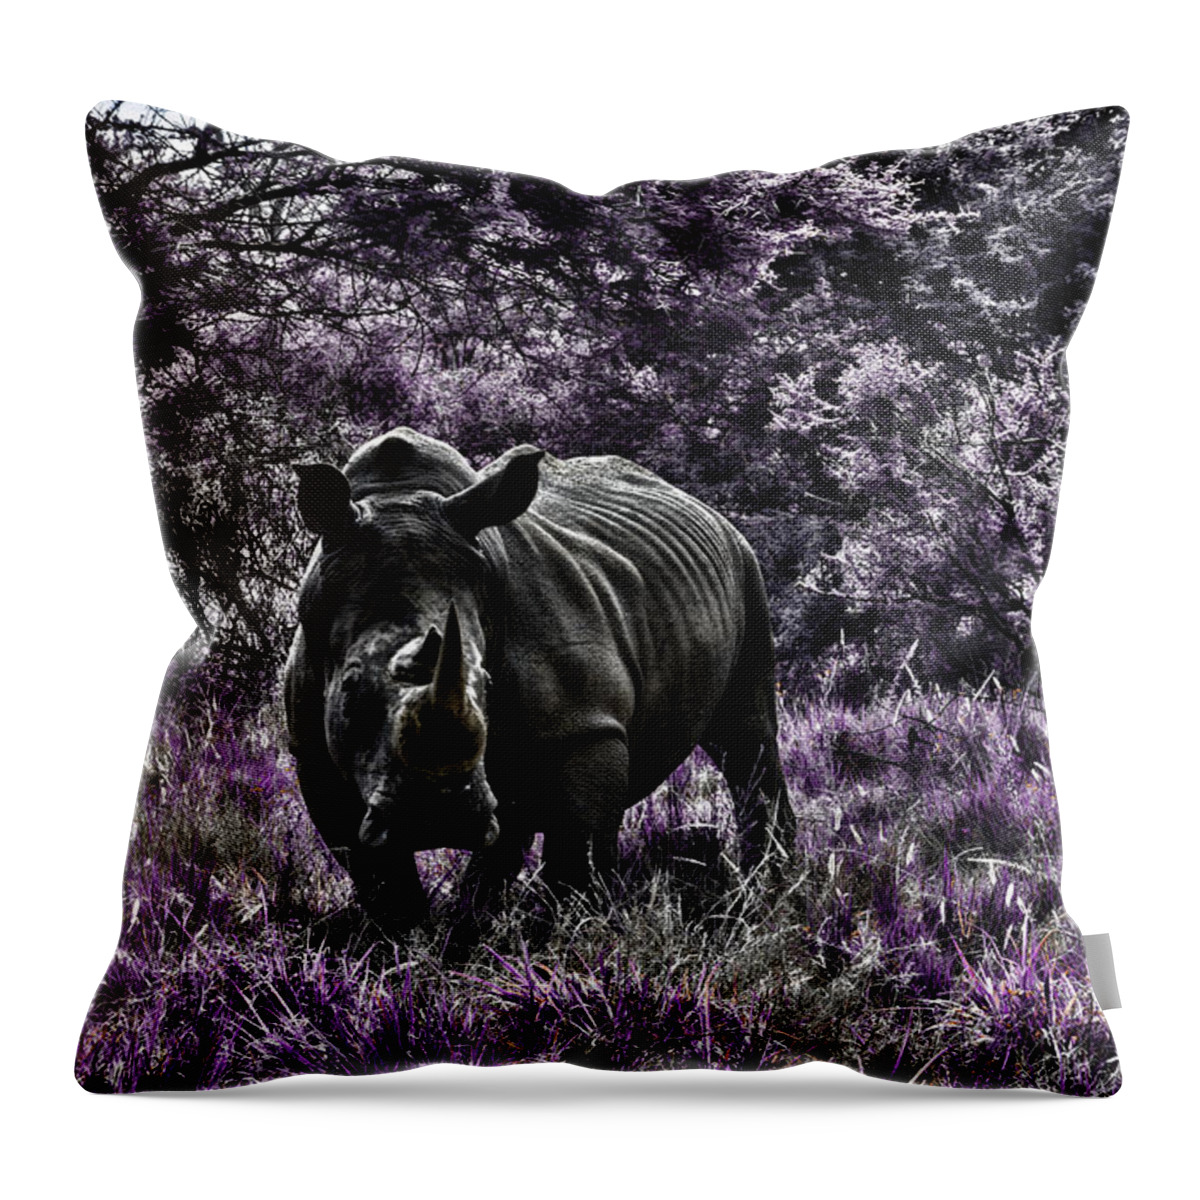 Rhino Throw Pillow featuring the photograph Styled Environment-The Modern Trendy Rhino by Douglas Barnard